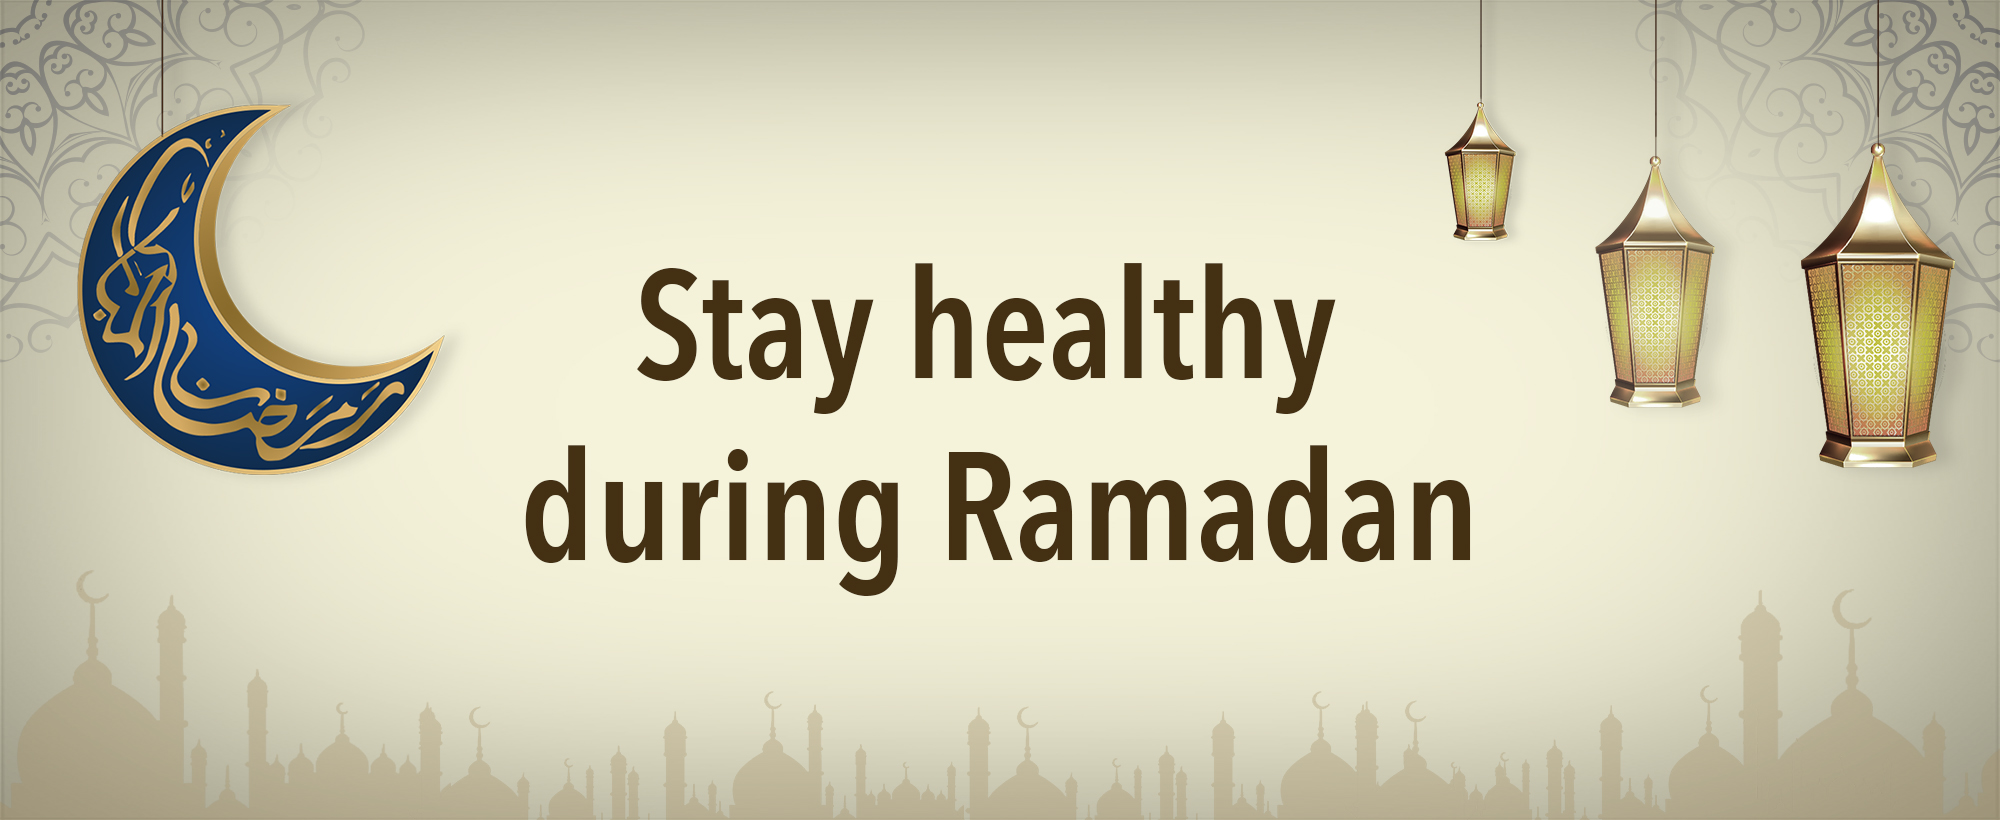 WHO EMRO | Stay healthy during Ramadan | Campaigns | NCDs